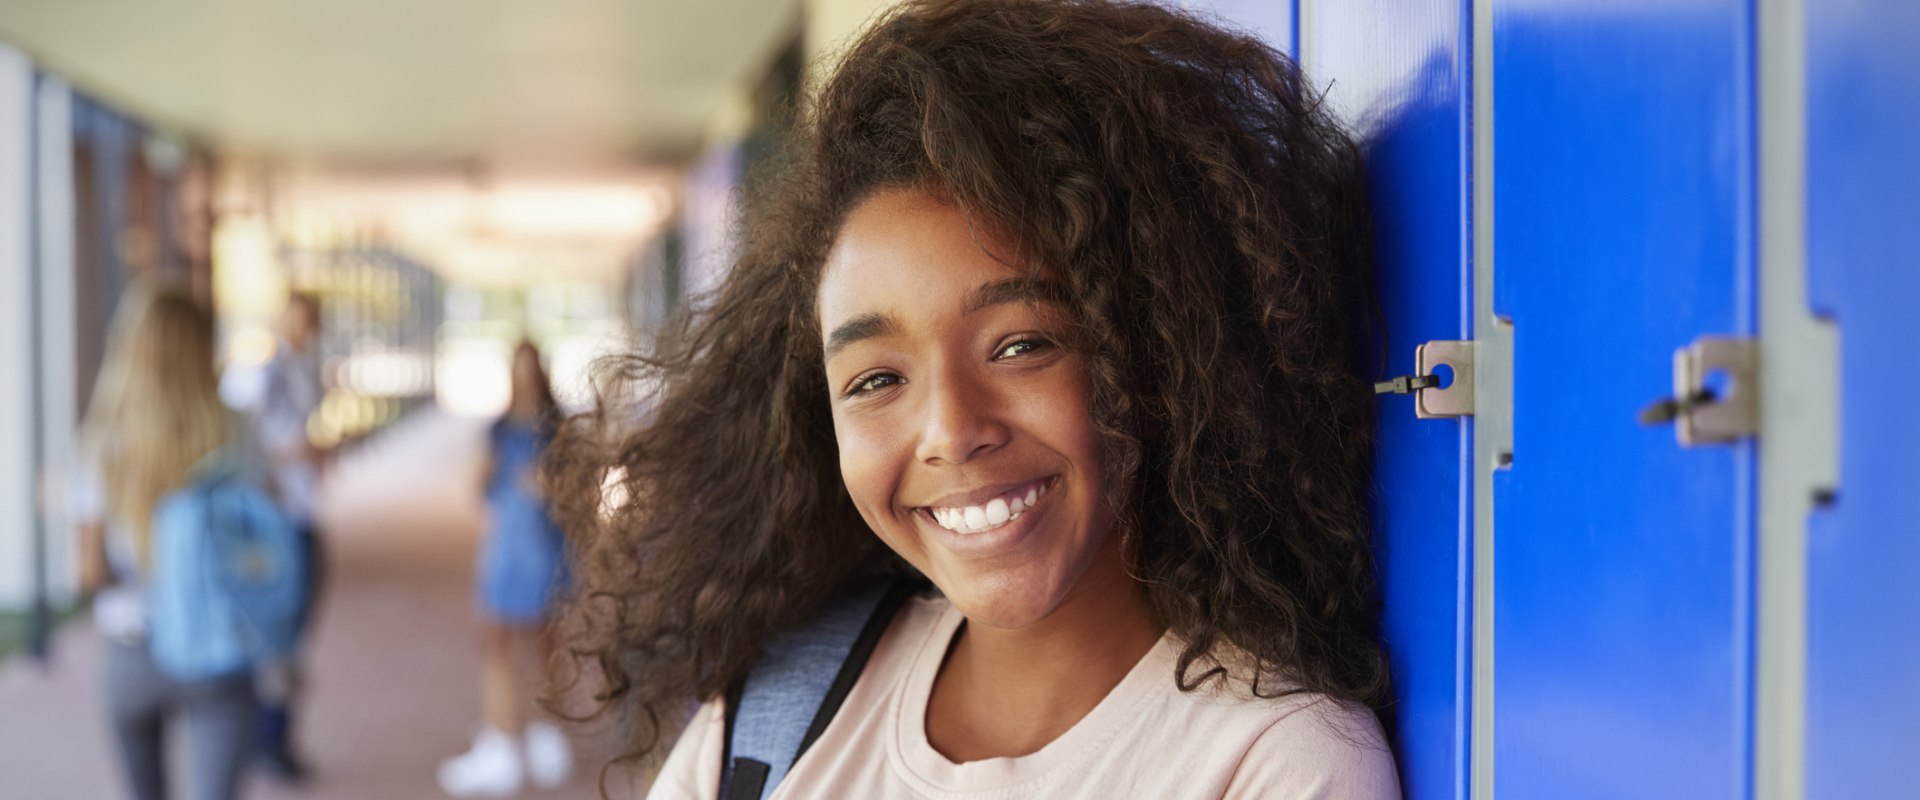 10 Tips to Ensure Your Teen's Academic Health